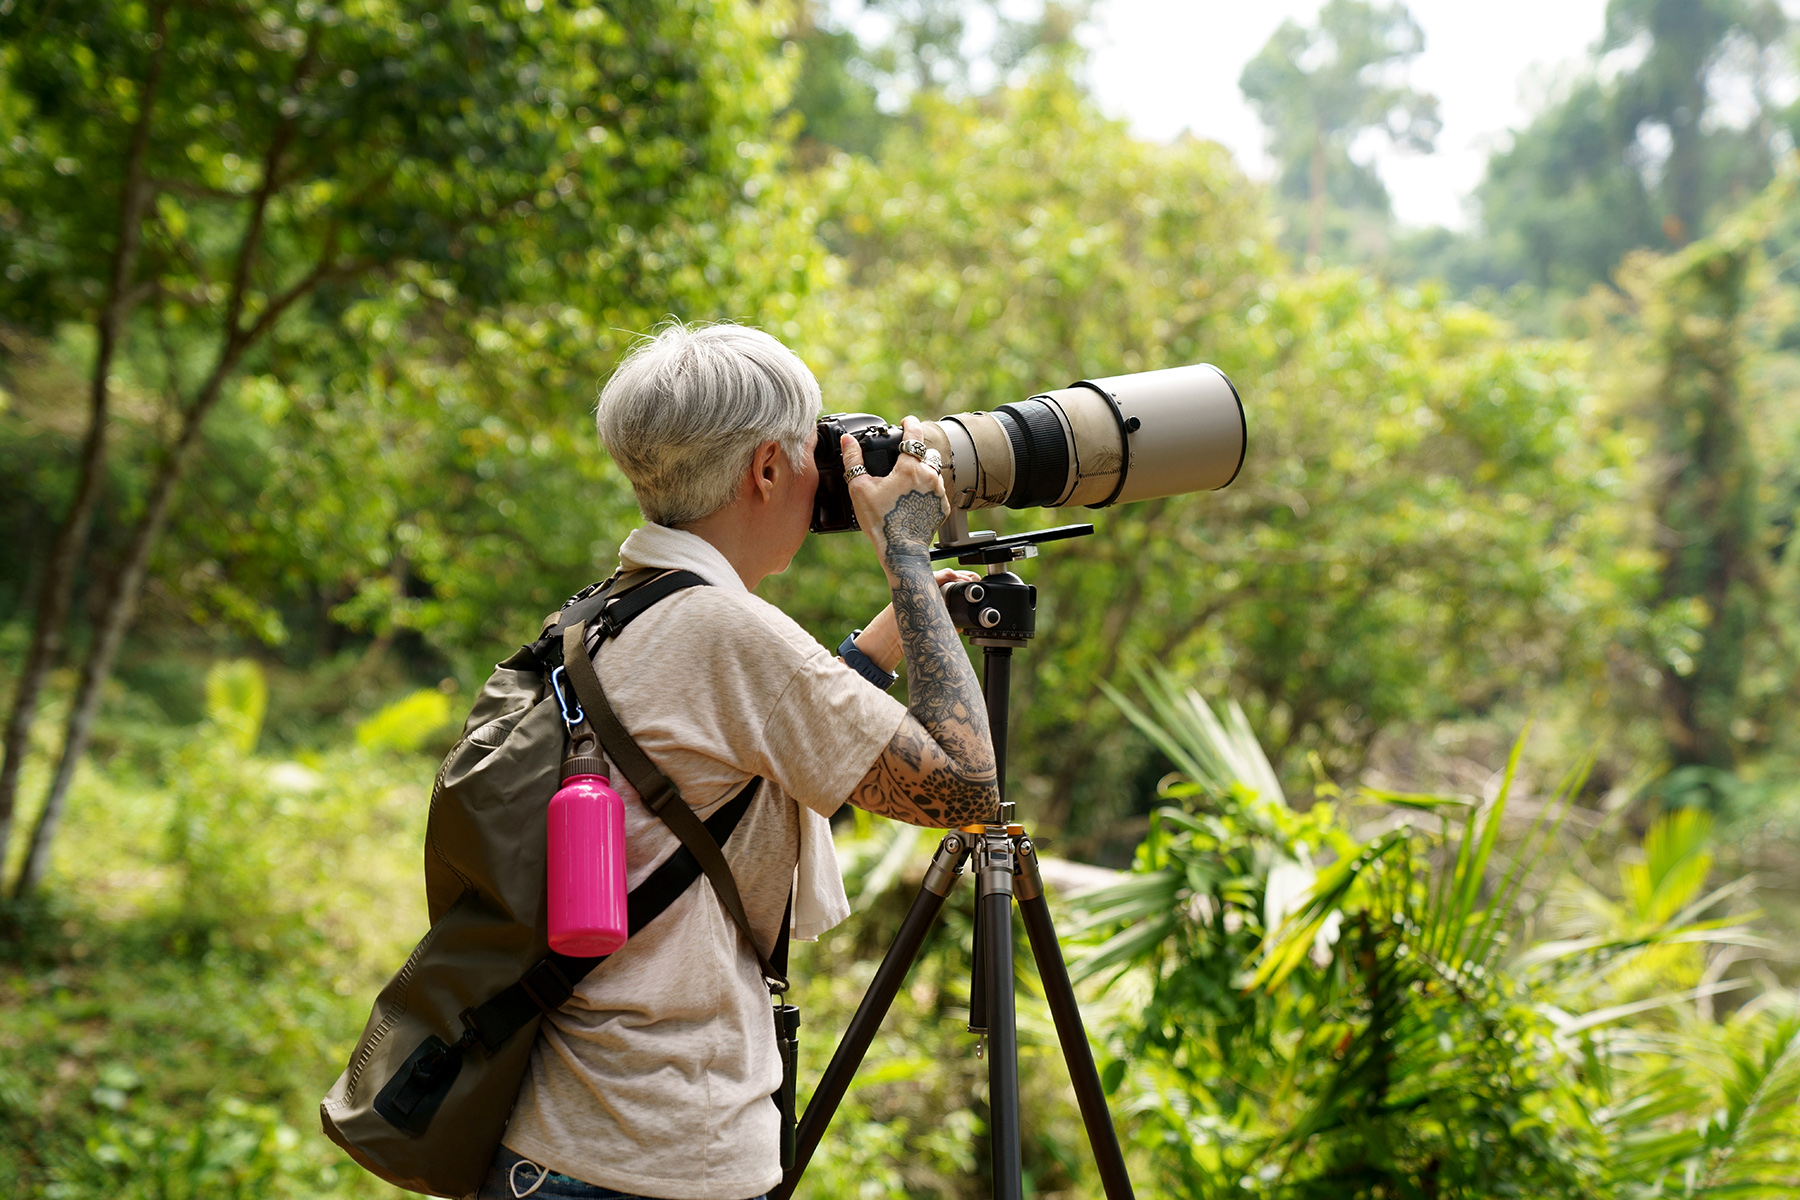 woman with tattoos and a huge camera with a telelens, standing in a forest taking a picture.